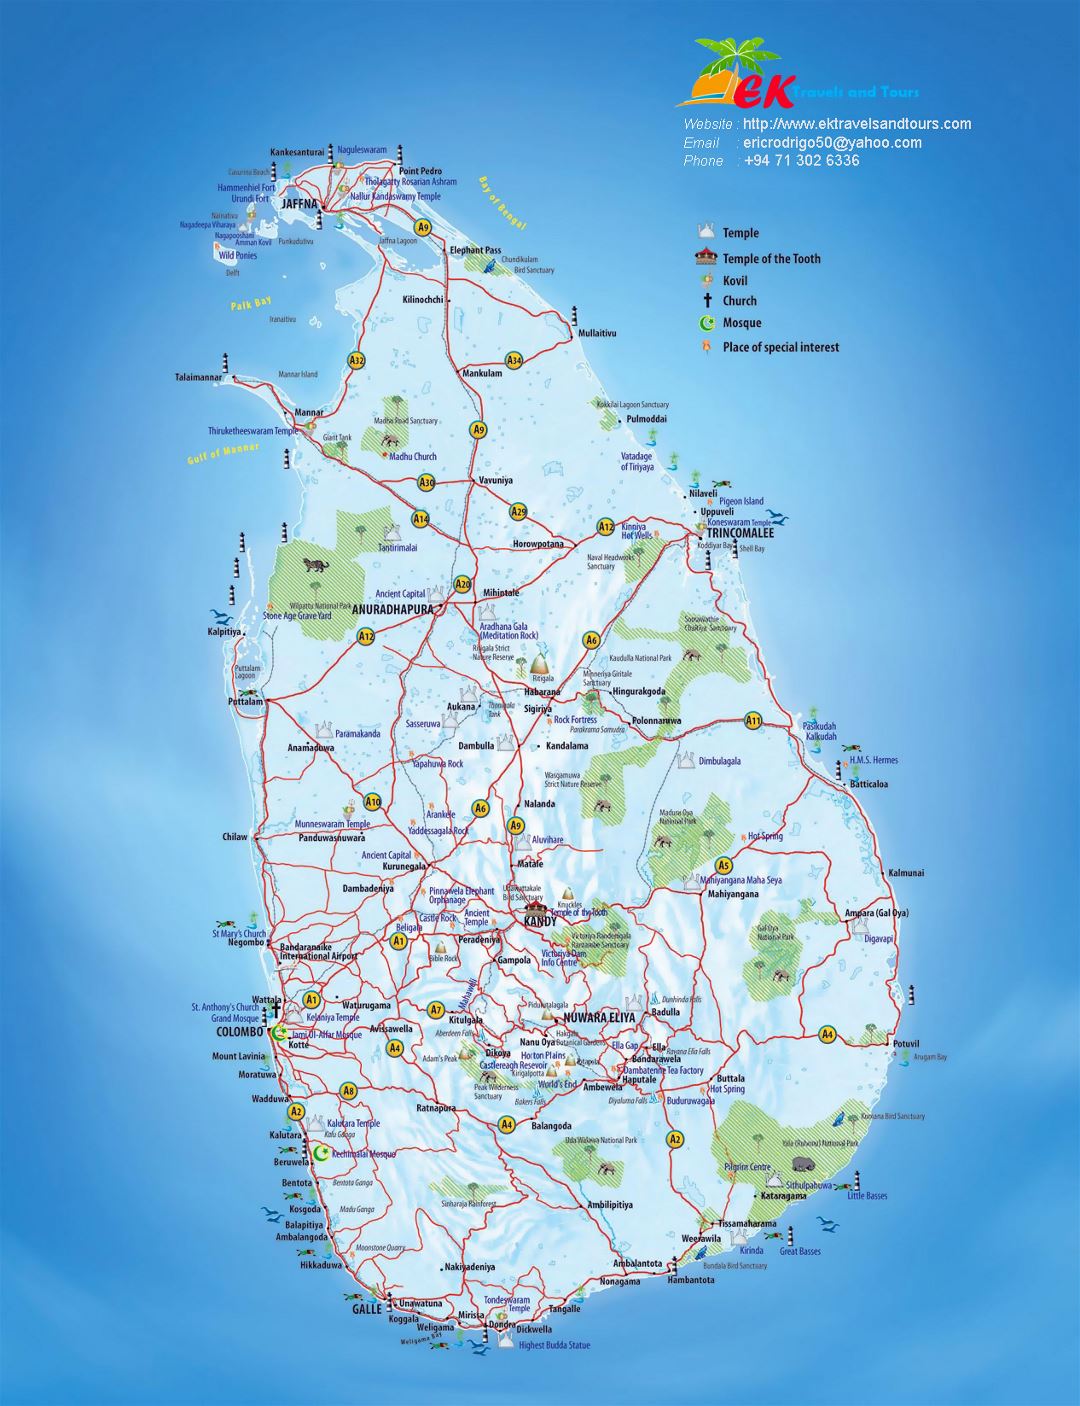 Large tourist map of Sri Lanka with other marks